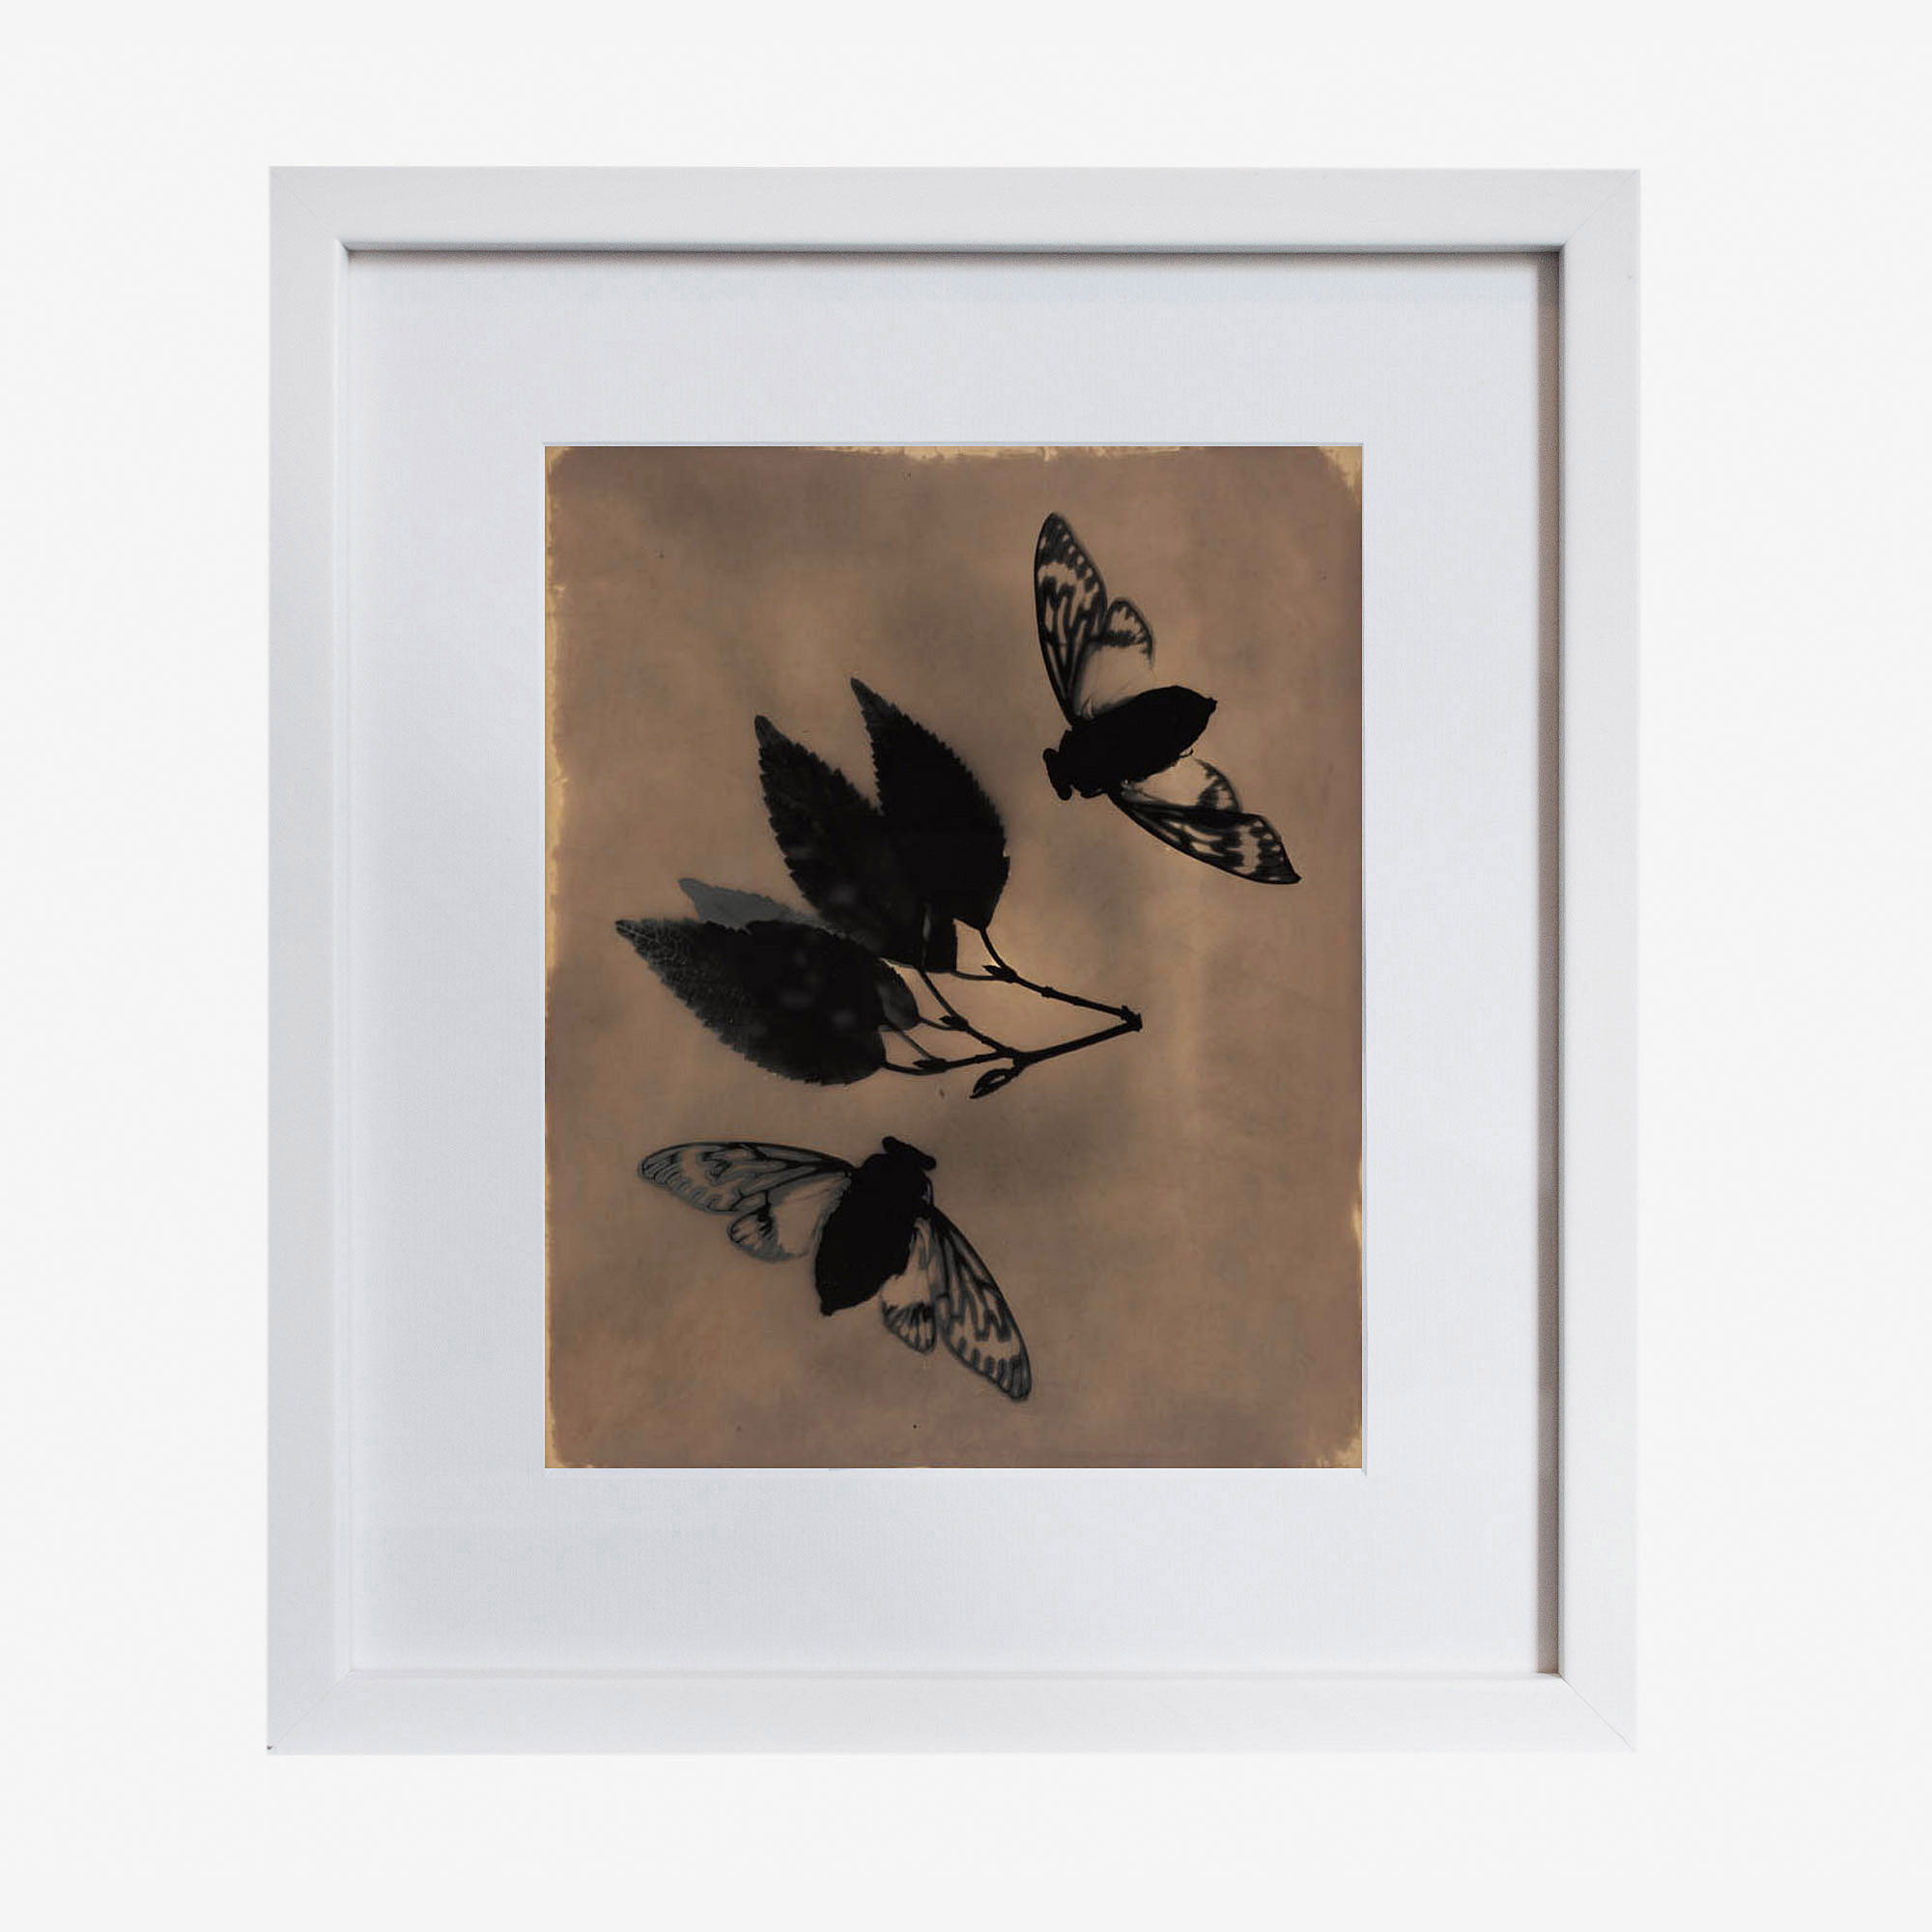 Emergence 328, unique analogue photogram in frame by Holly Schulte